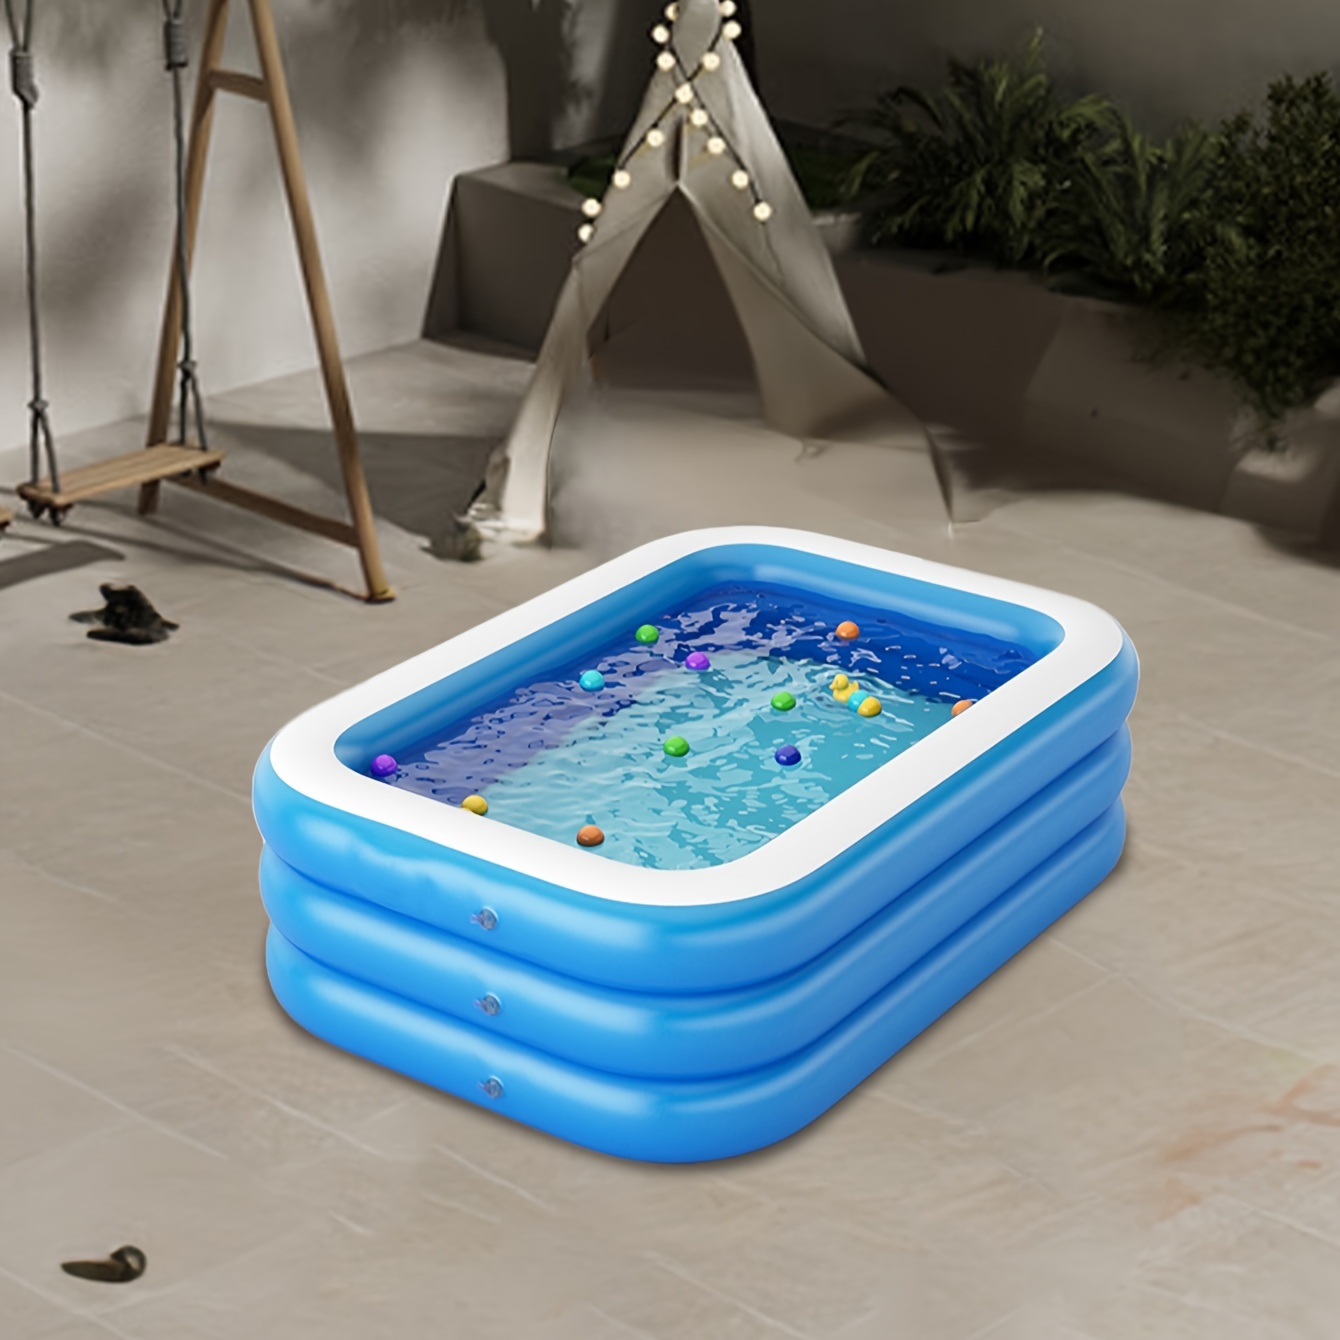 

Extra-large Inflatable Swimming Pool For Adults - Durable Pvc, Multi-component Set, Blue & White, Perfect For Outdoor Garden And Yard Fun, 102x55x23 Inches Inflatable Pool Pool Floats For Adults